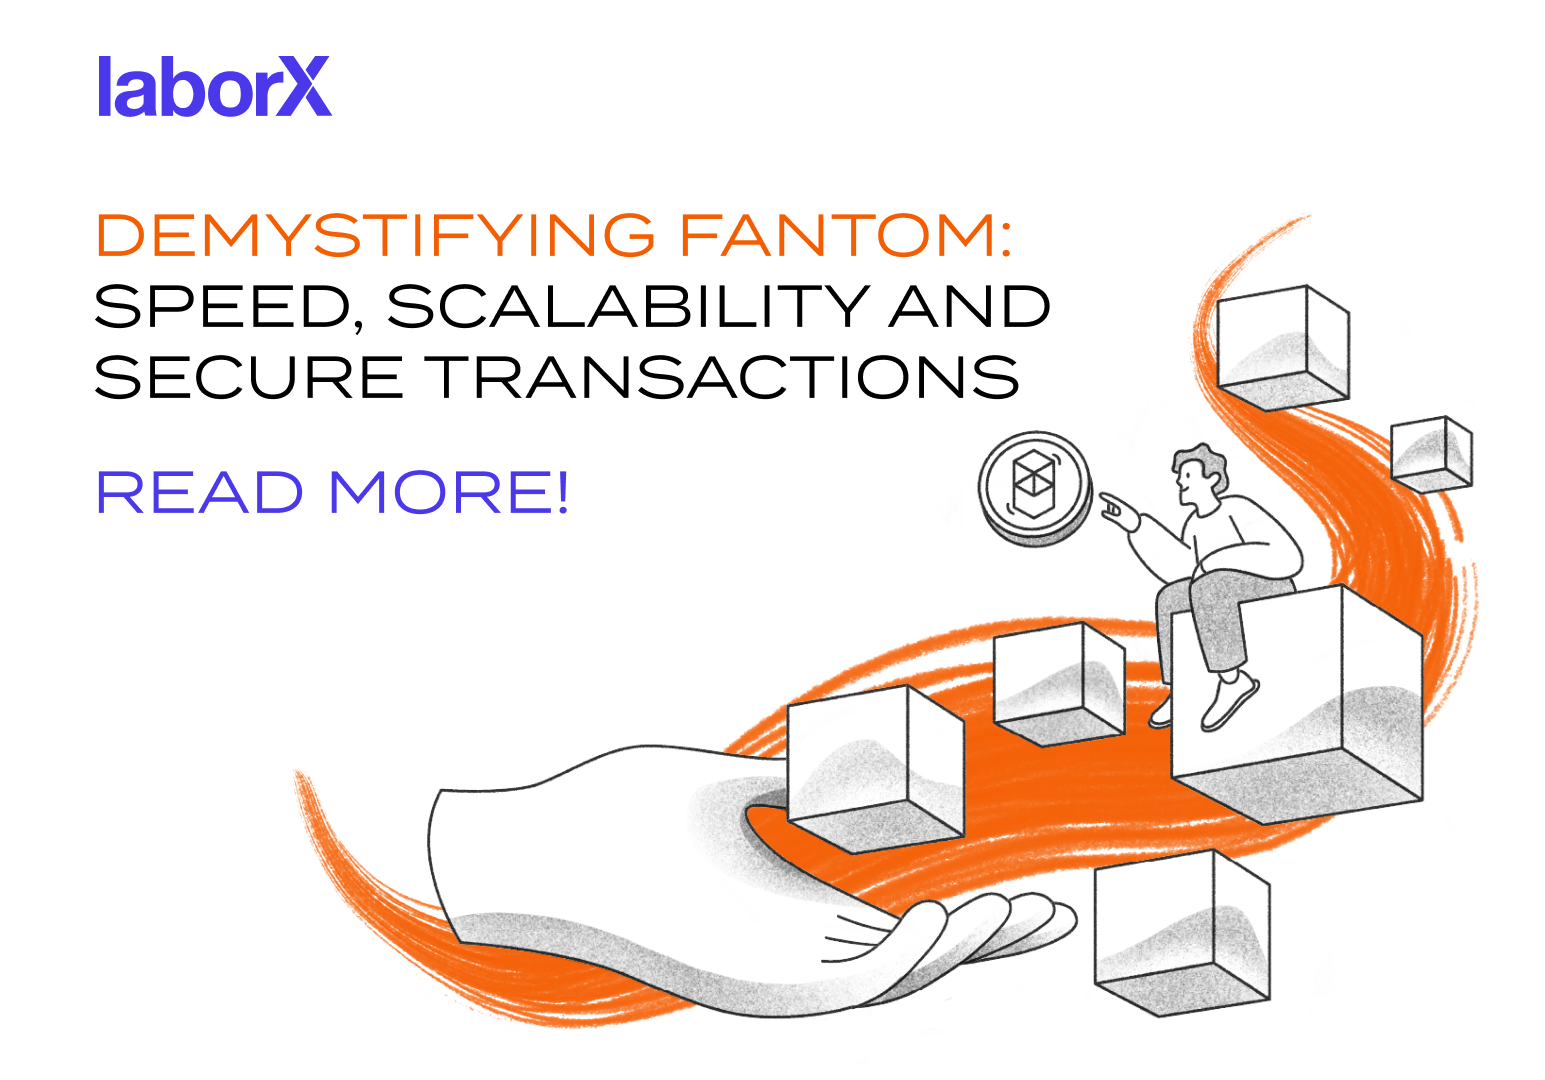 Demystifying Fantom: Speed, Scalability, and Secure Transactions